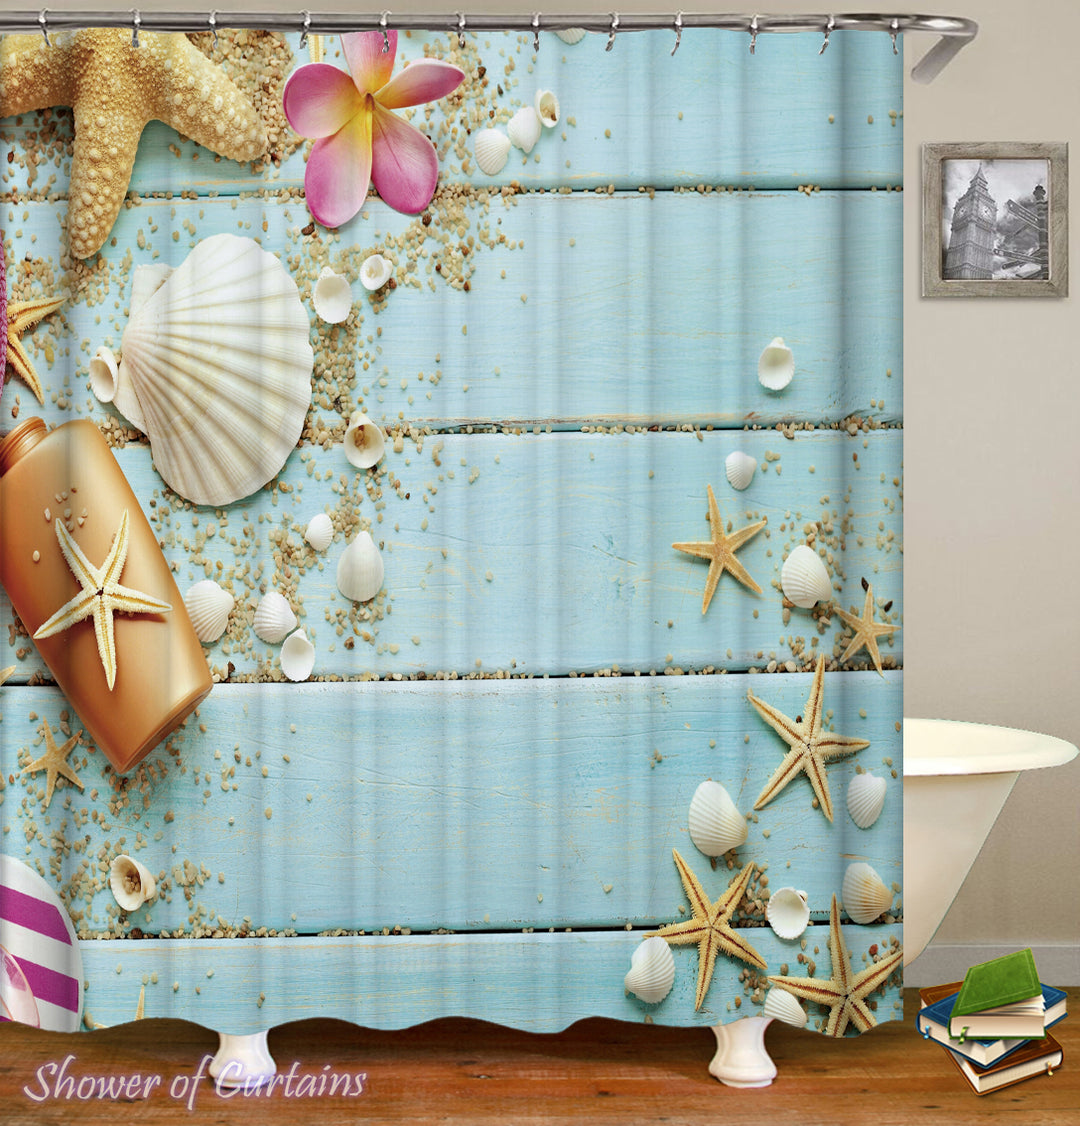 Shower Curtain of Starfish and Shells On A Blue Deck